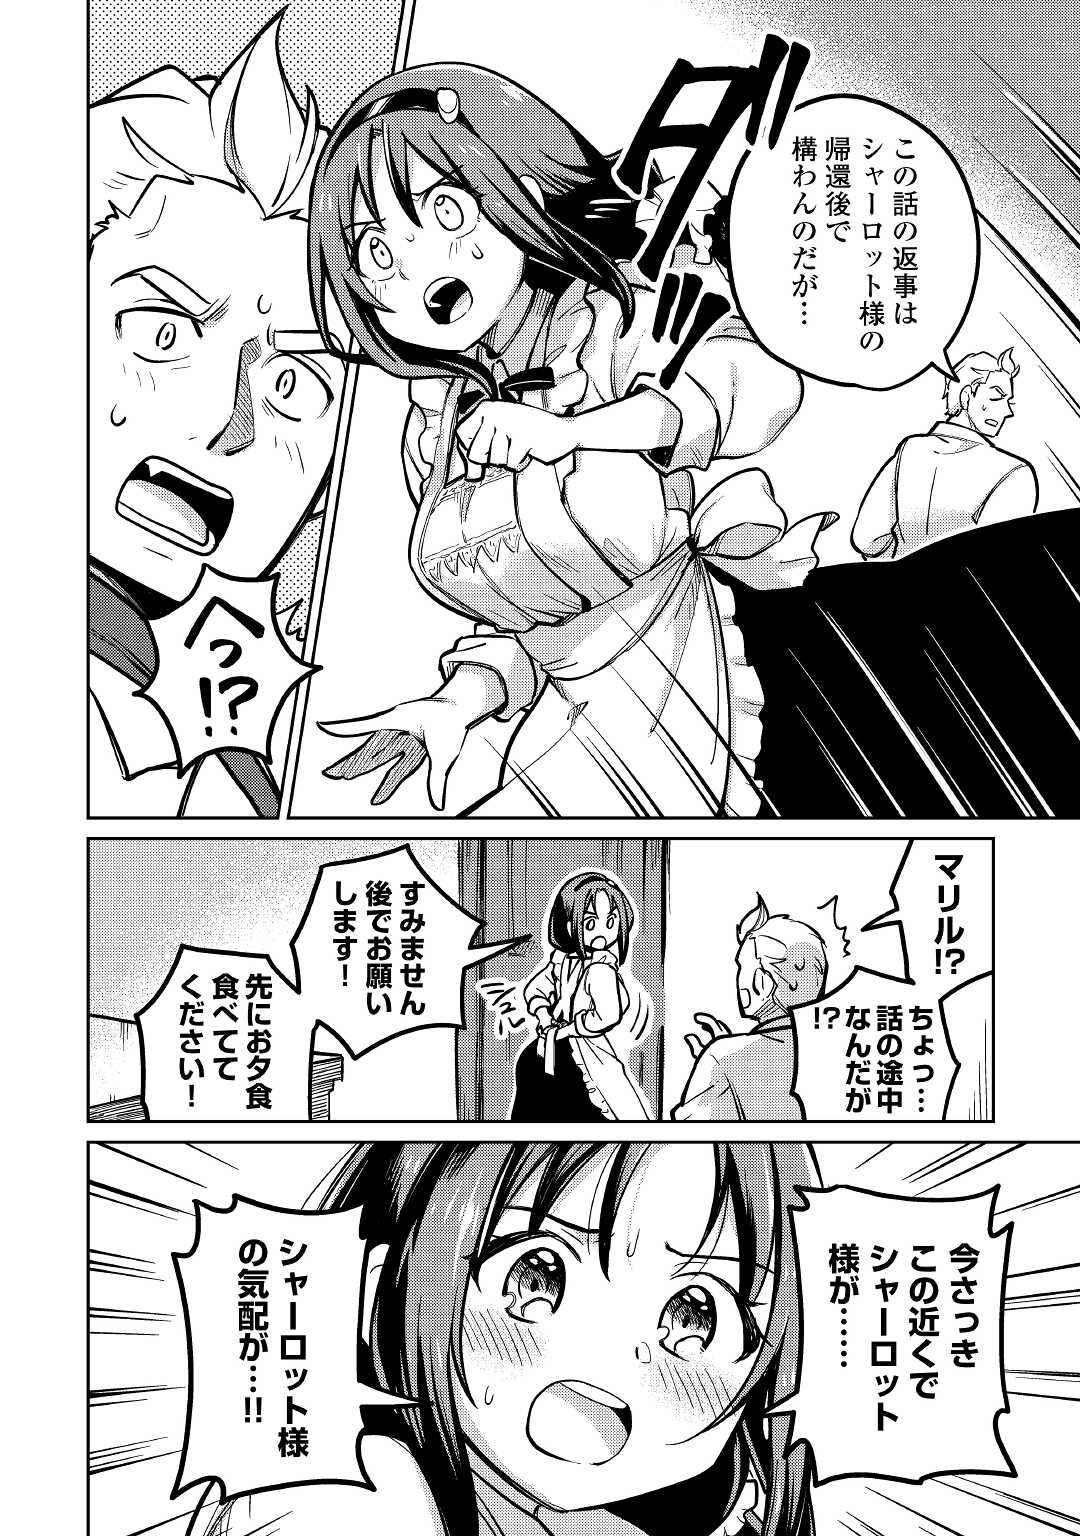 The Former Structural Researcher’s Story of Otherworldly Adventure 第41話 - Page 26